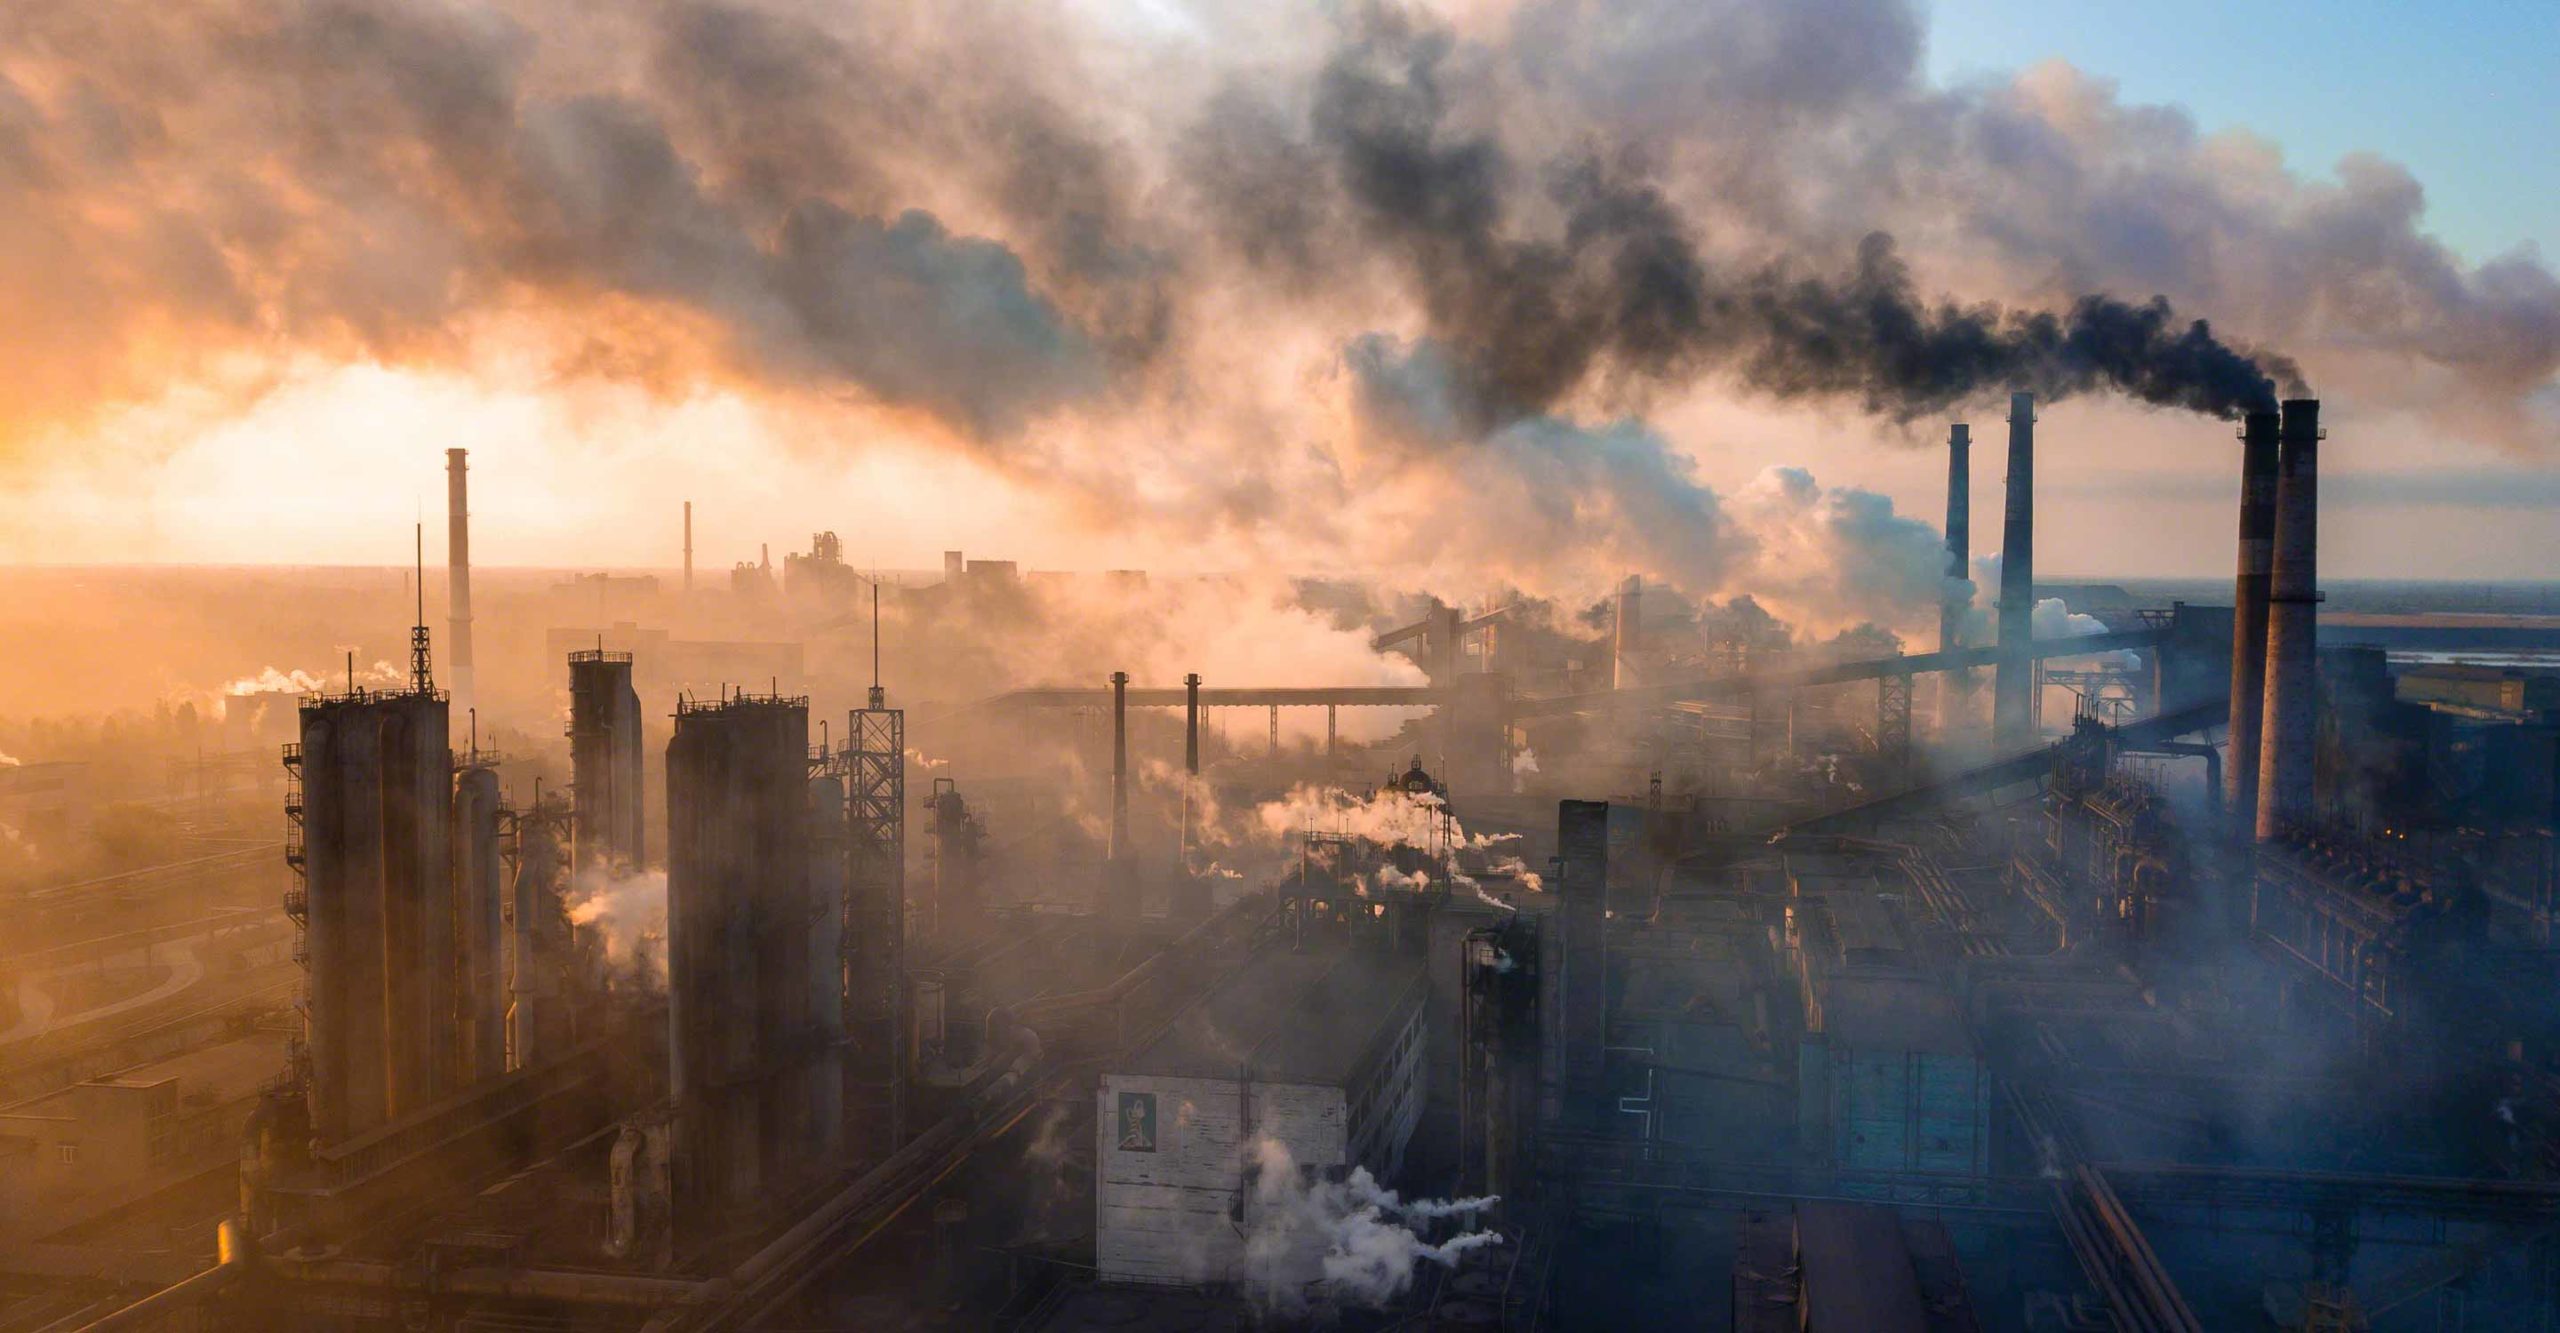 DAILY AIR POLLUTION = DAILY BRAIN POLLUTION, NEW STUDY SHOWS